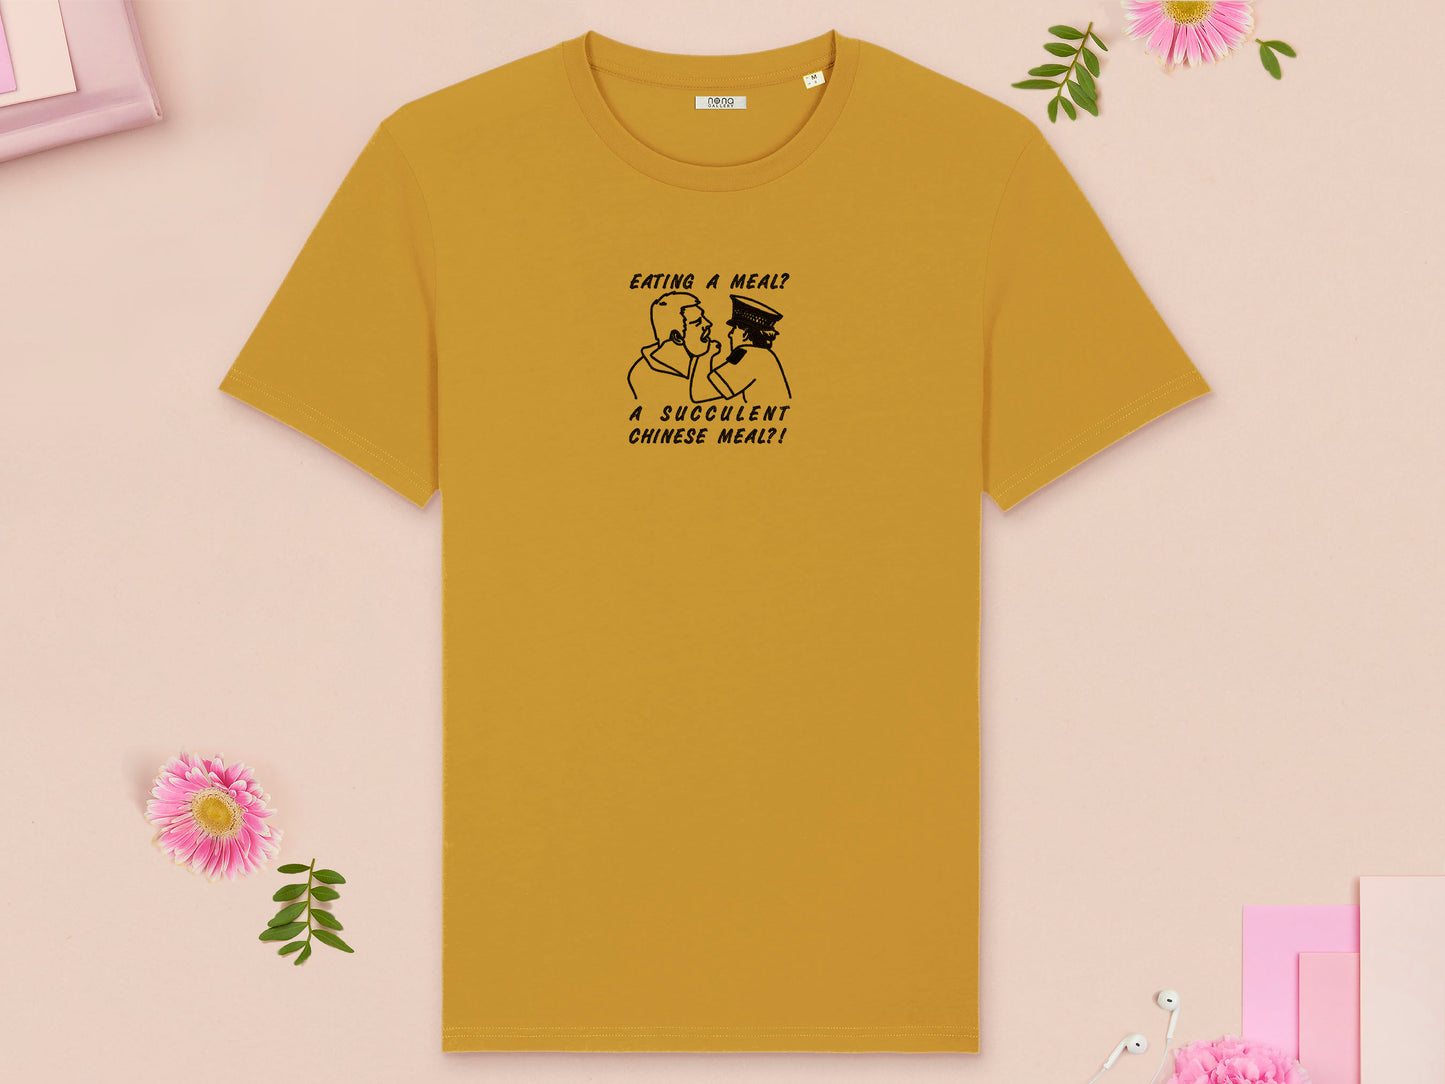 A yellow crew neck short sleeve t-shirt, with an embroidered black thread design of the viral democracy manifest video of Charles Dozsa being arrested by a policeman with the text reading Eating A Meal? A Succulent Chinese Meal?!